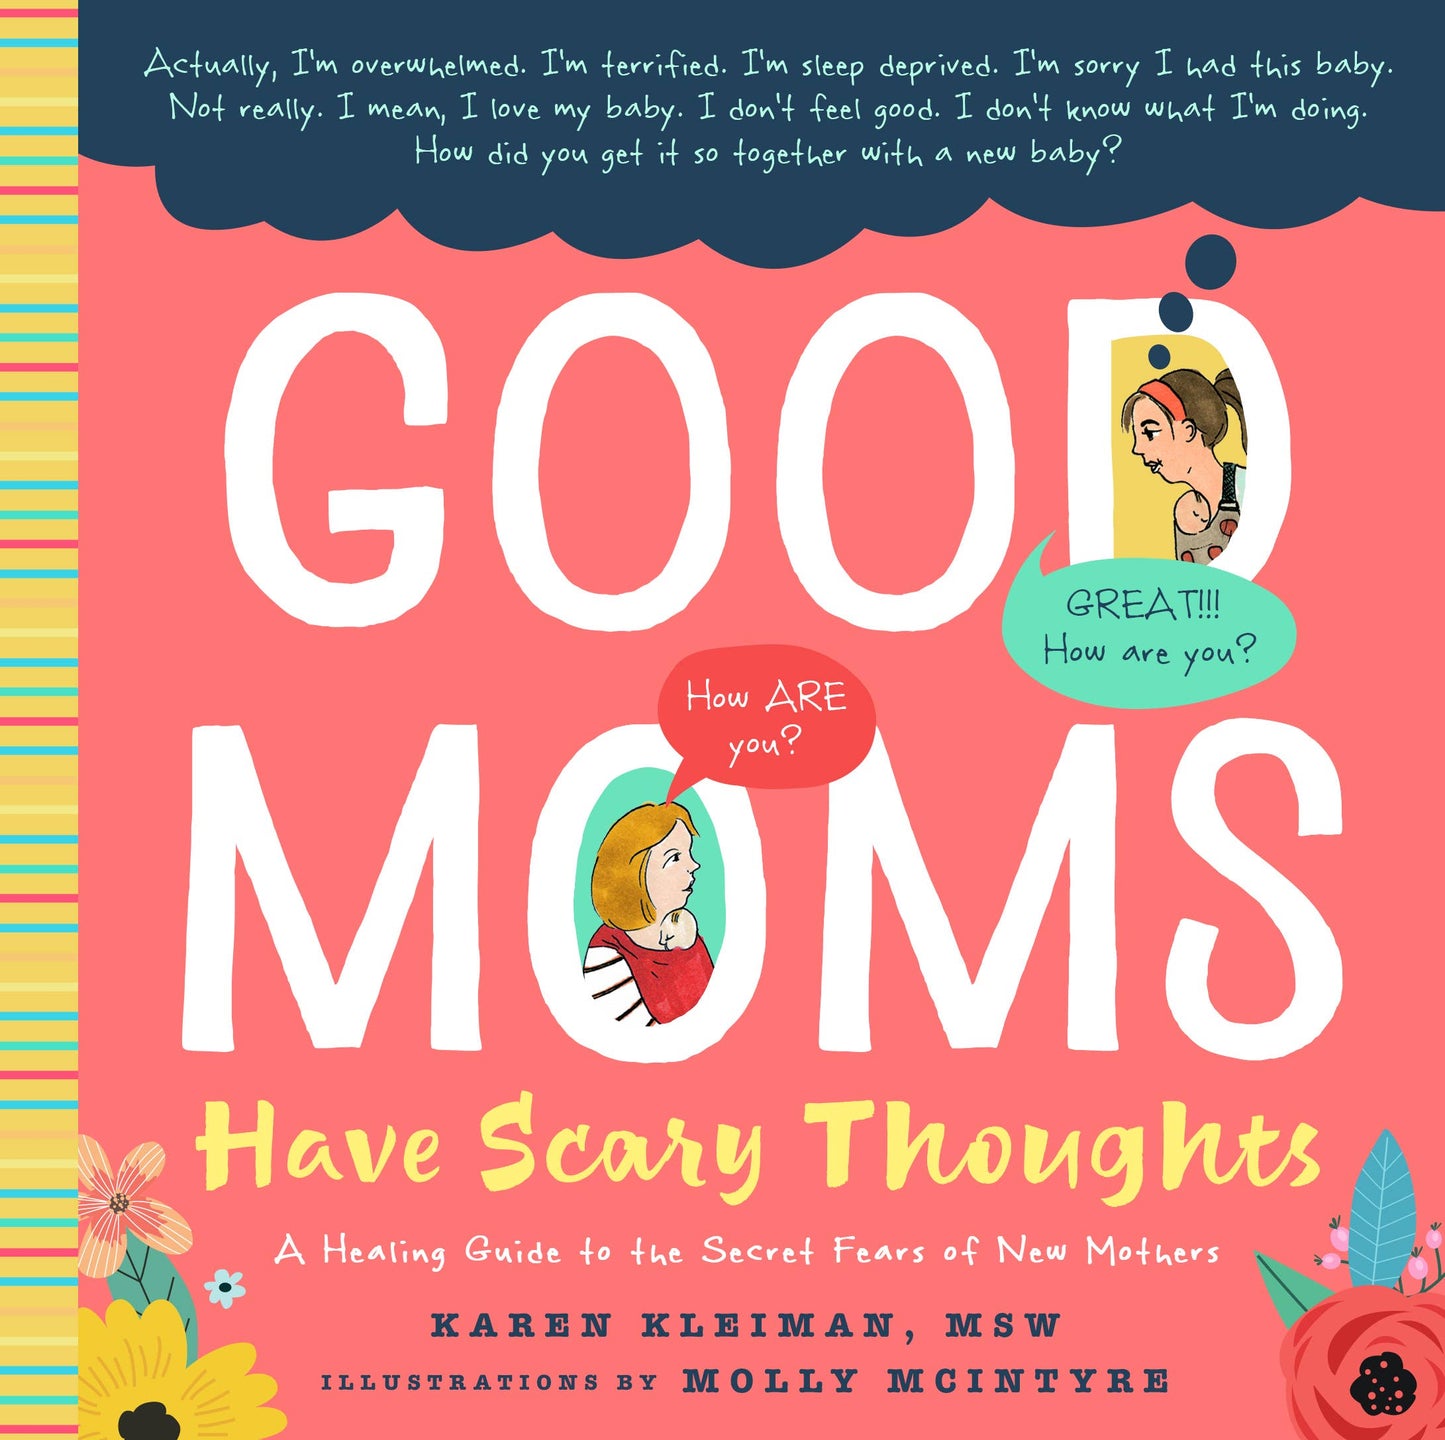 Familius, LLC - Good Moms Have Scary Thoughts